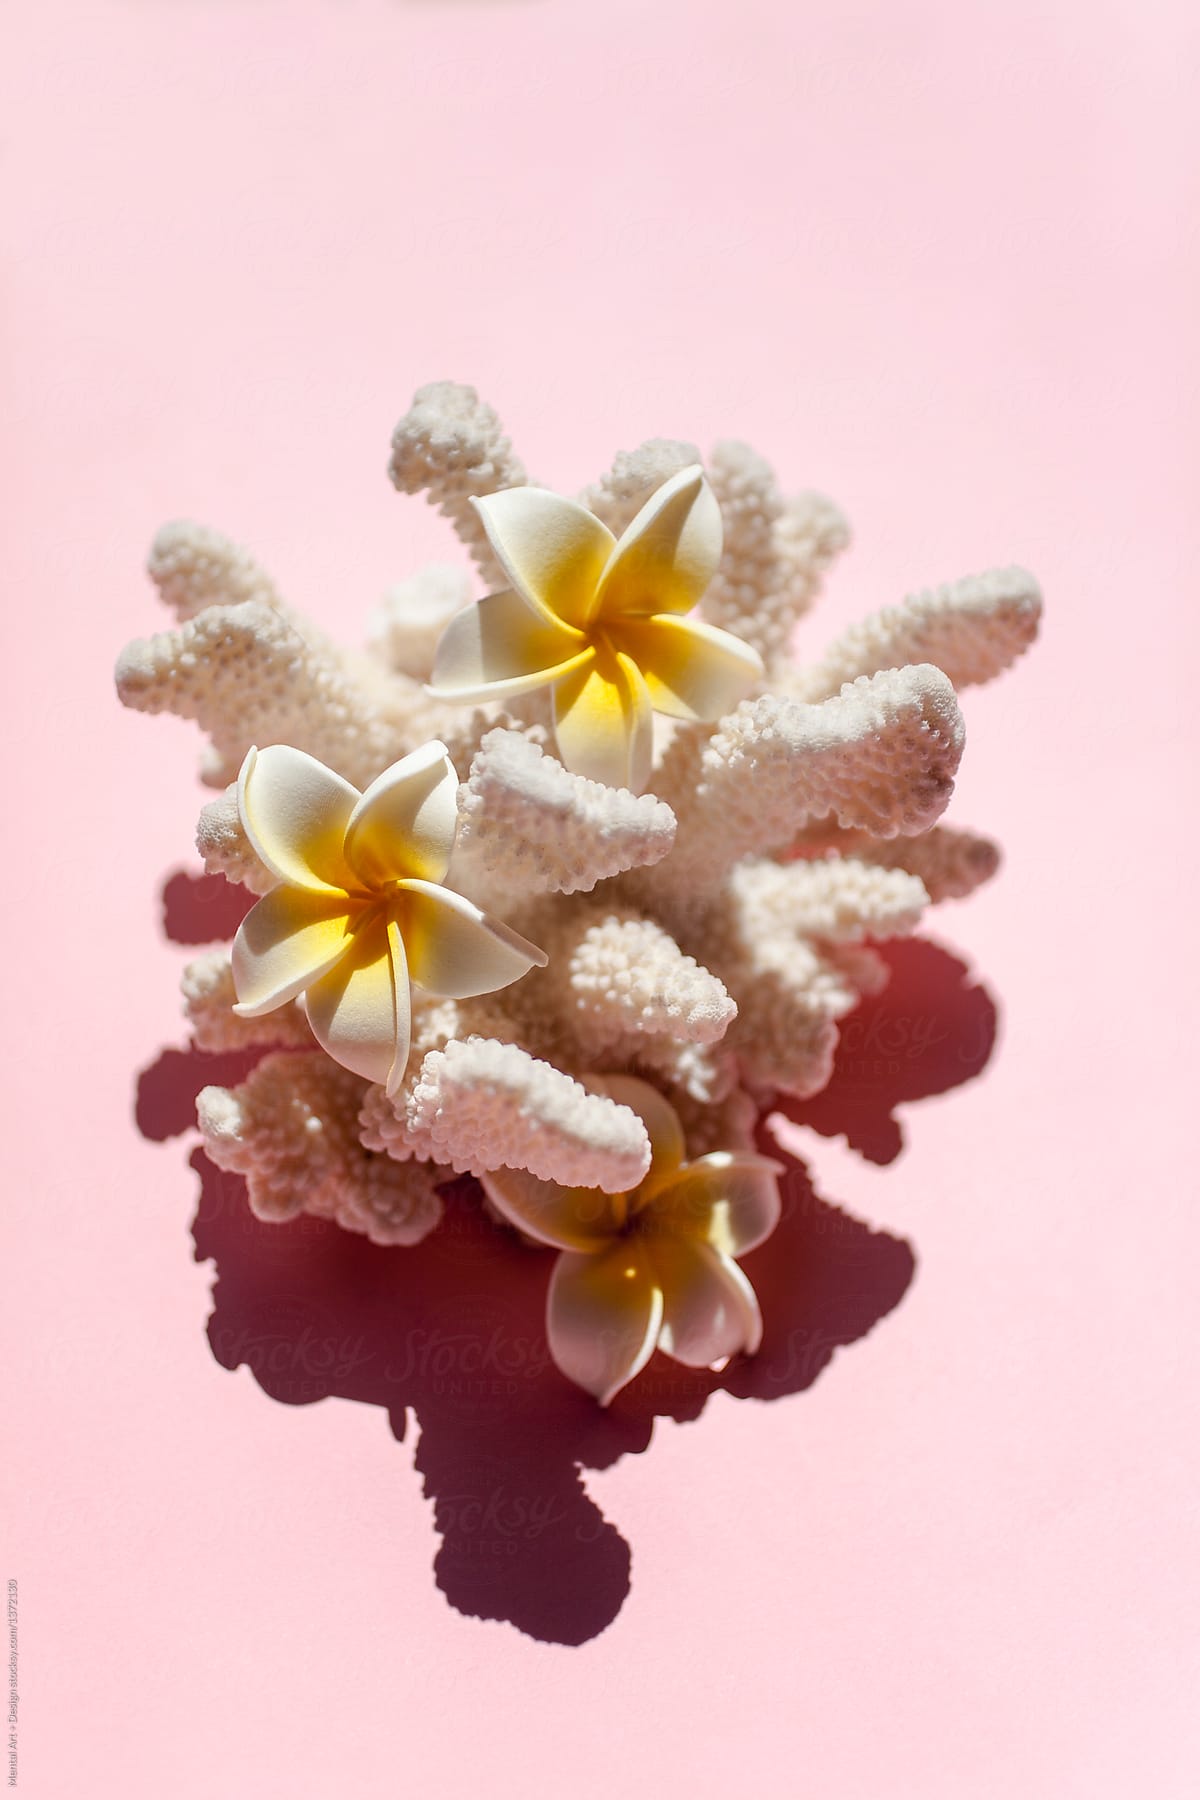 Tropical Shells and Coral with Flowers